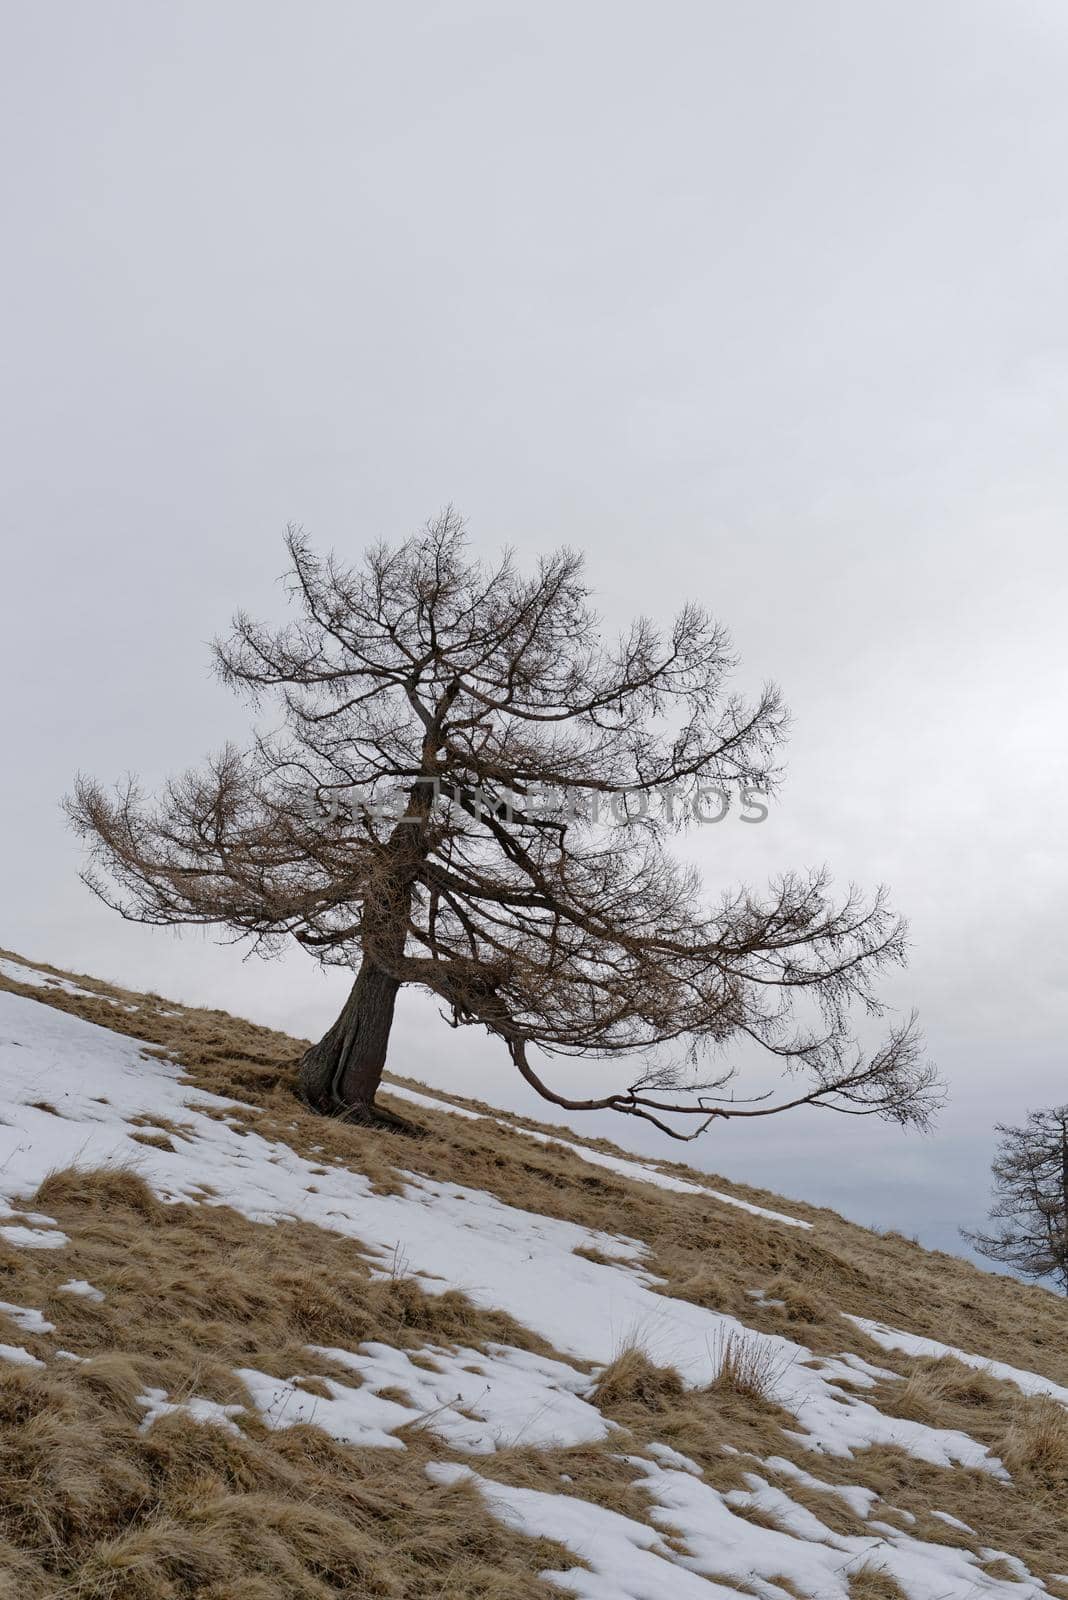 An old gnarled tree stands on a steep meadow covered with snow and defies wind and weather.